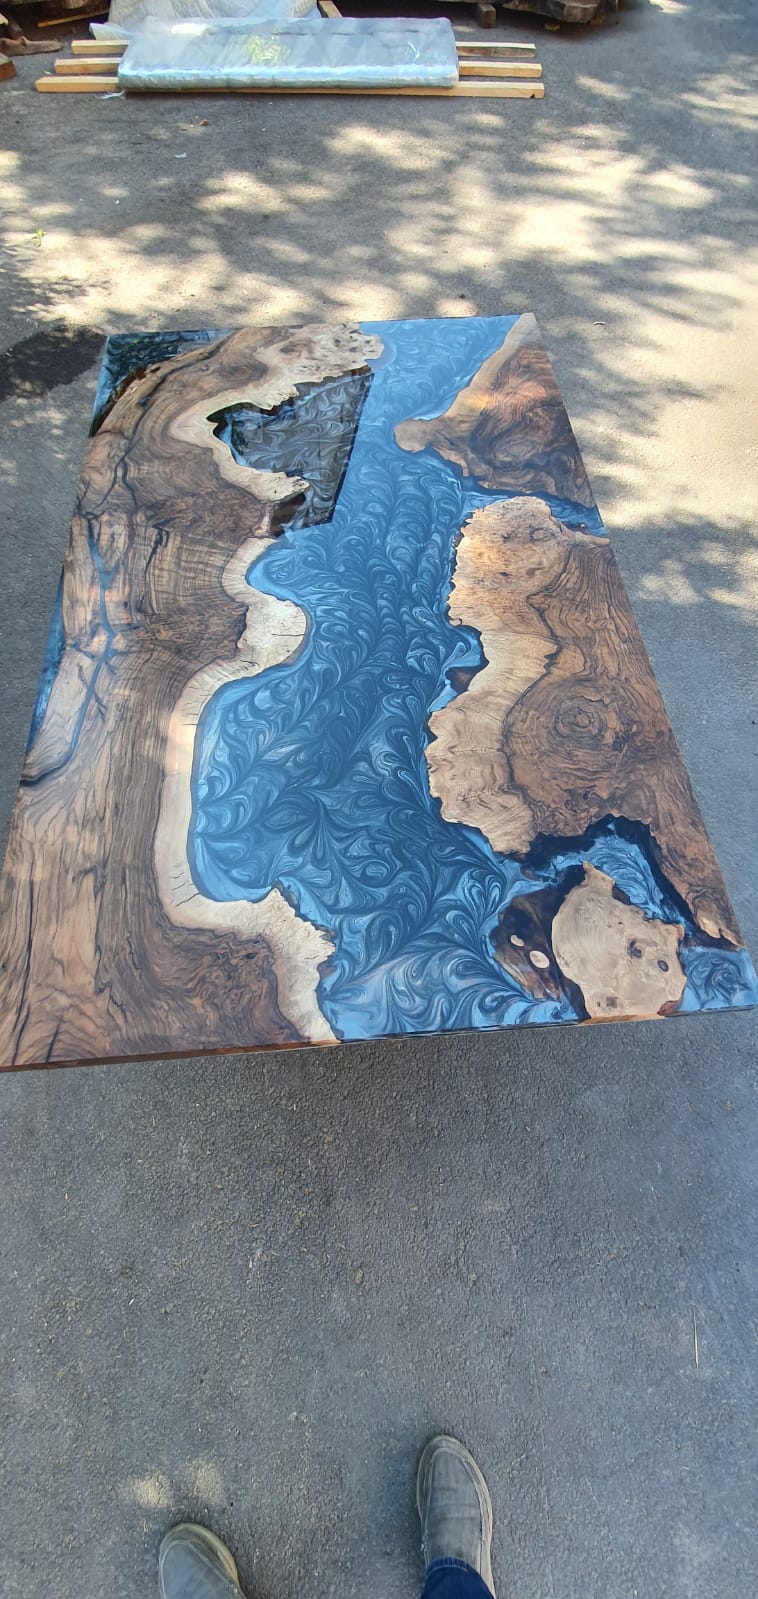 How to make an epoxy table?